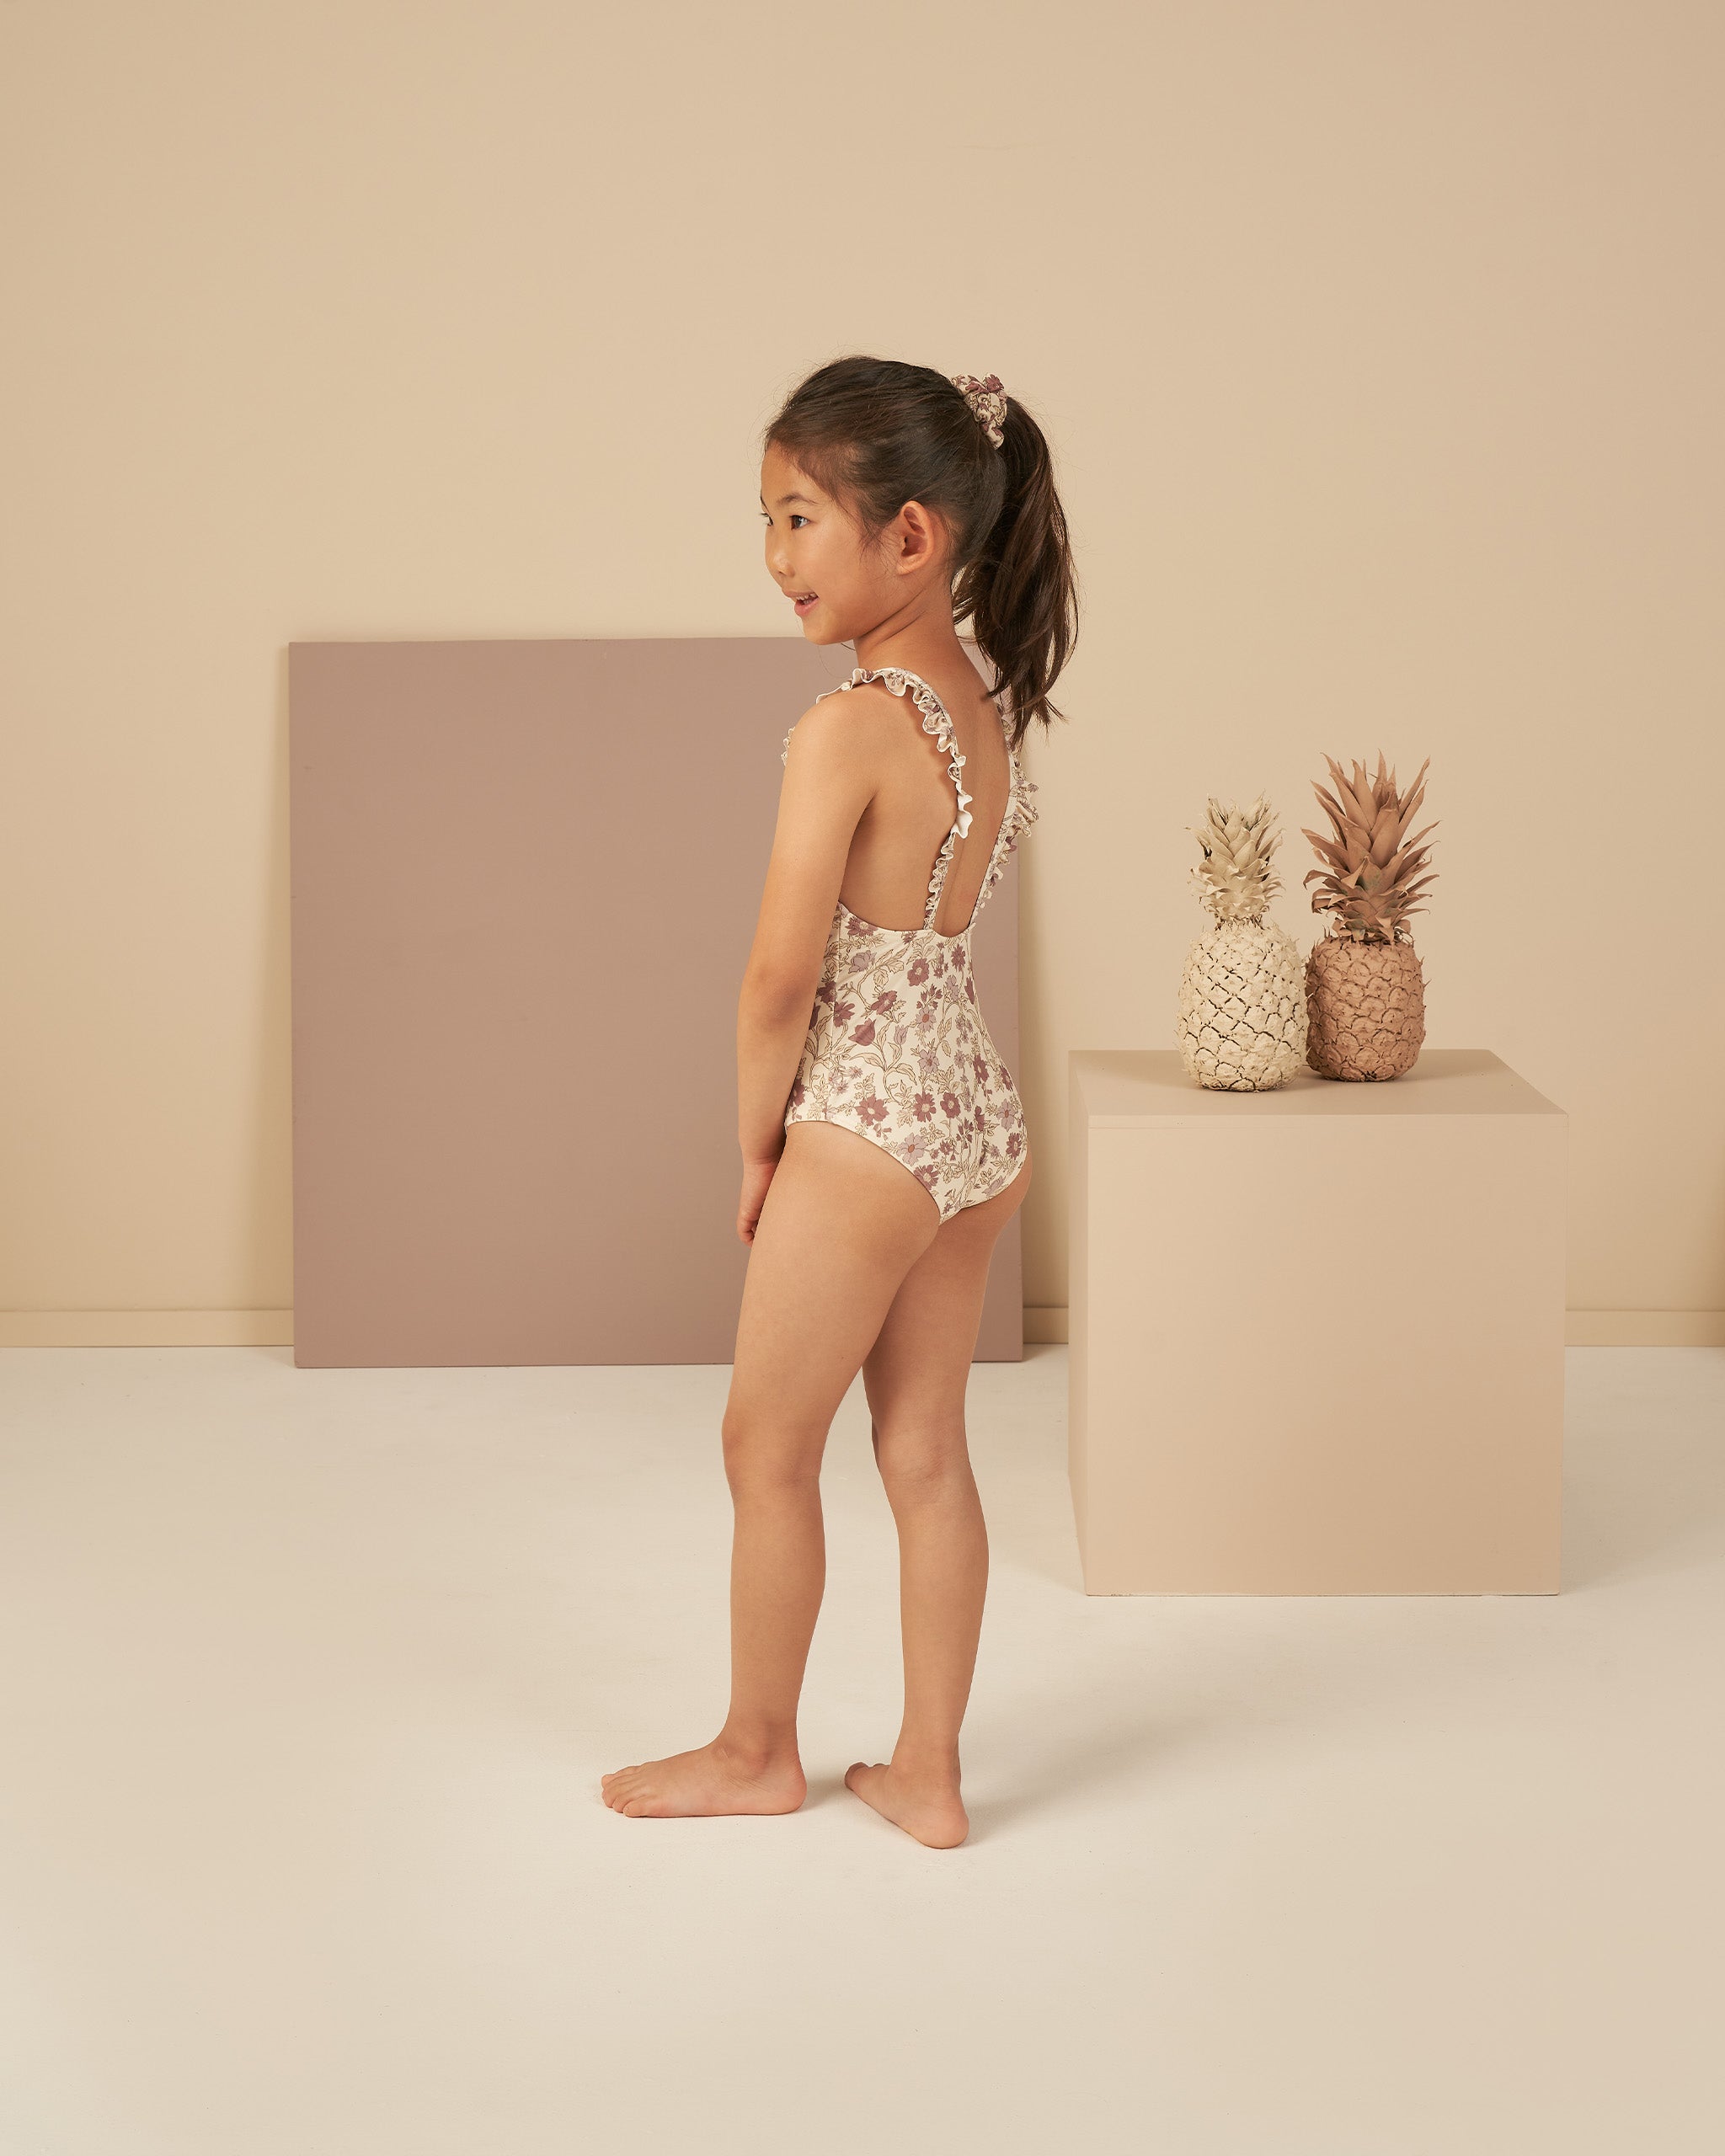 Arielle One-Piece || Bloom - Rylee + Cru | Kids Clothes | Trendy Baby Clothes | Modern Infant Outfits |